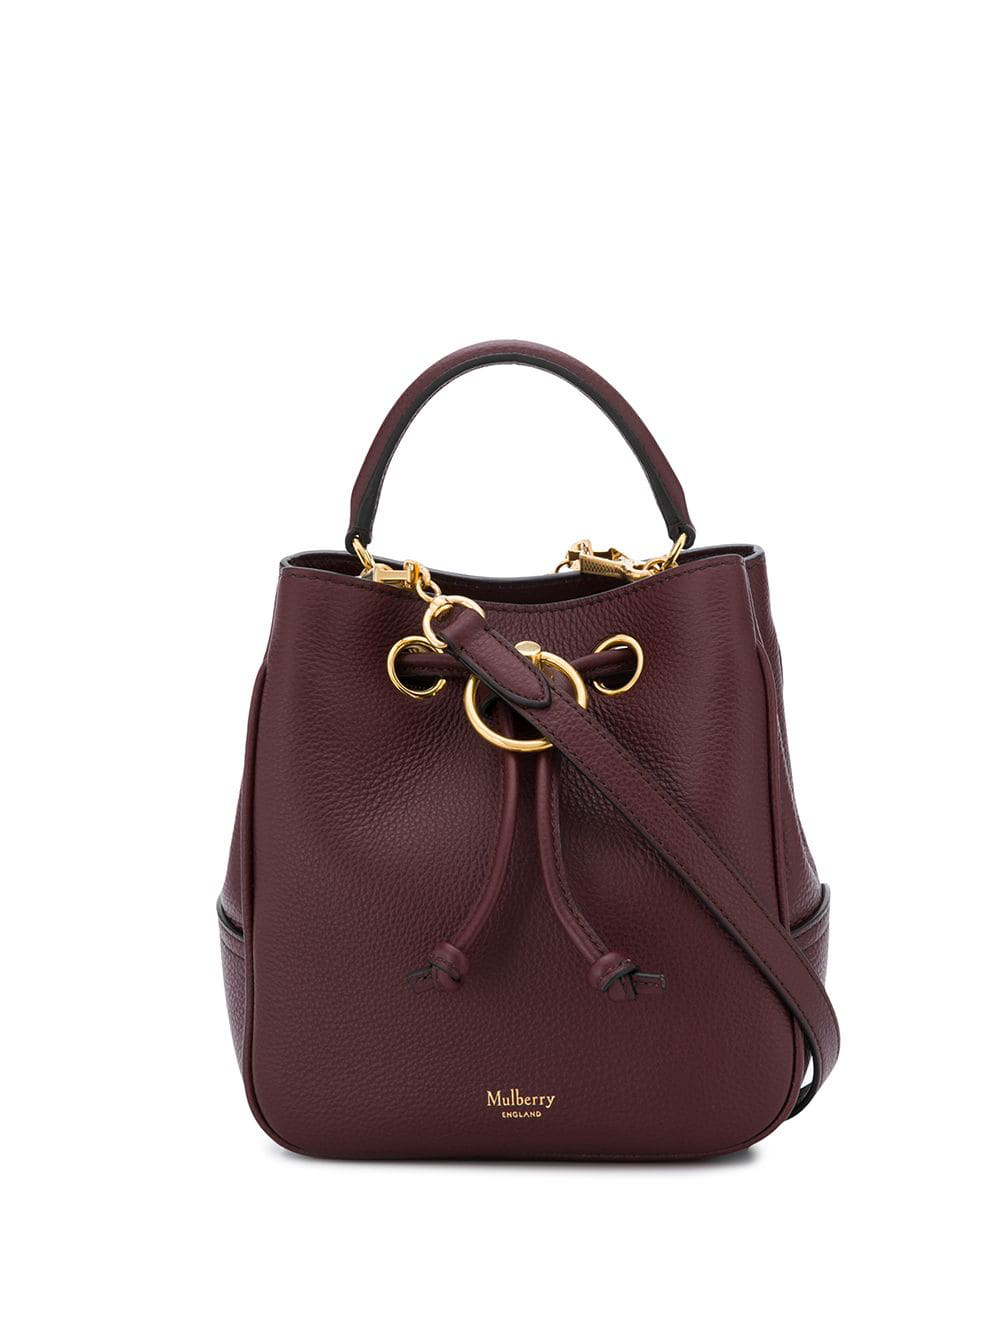 Mulberry Bags Discount Prices